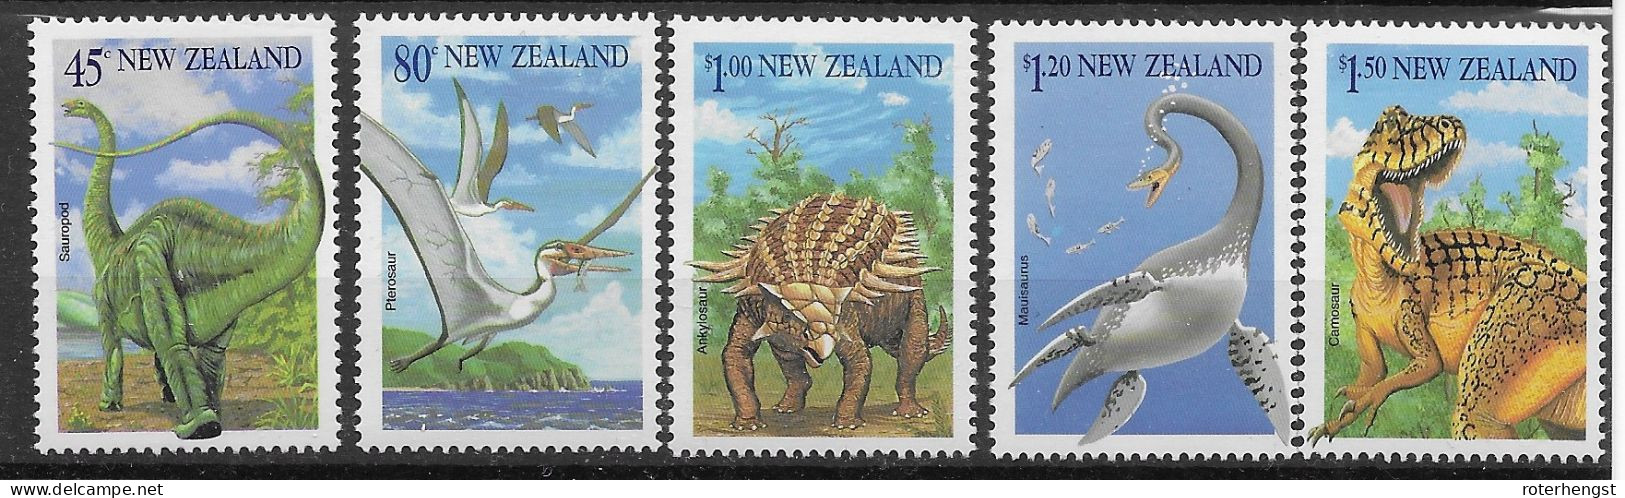 New Zealand Mnh ** 1993 Dinosaurs Set Without Booklet Stamp - Unused Stamps